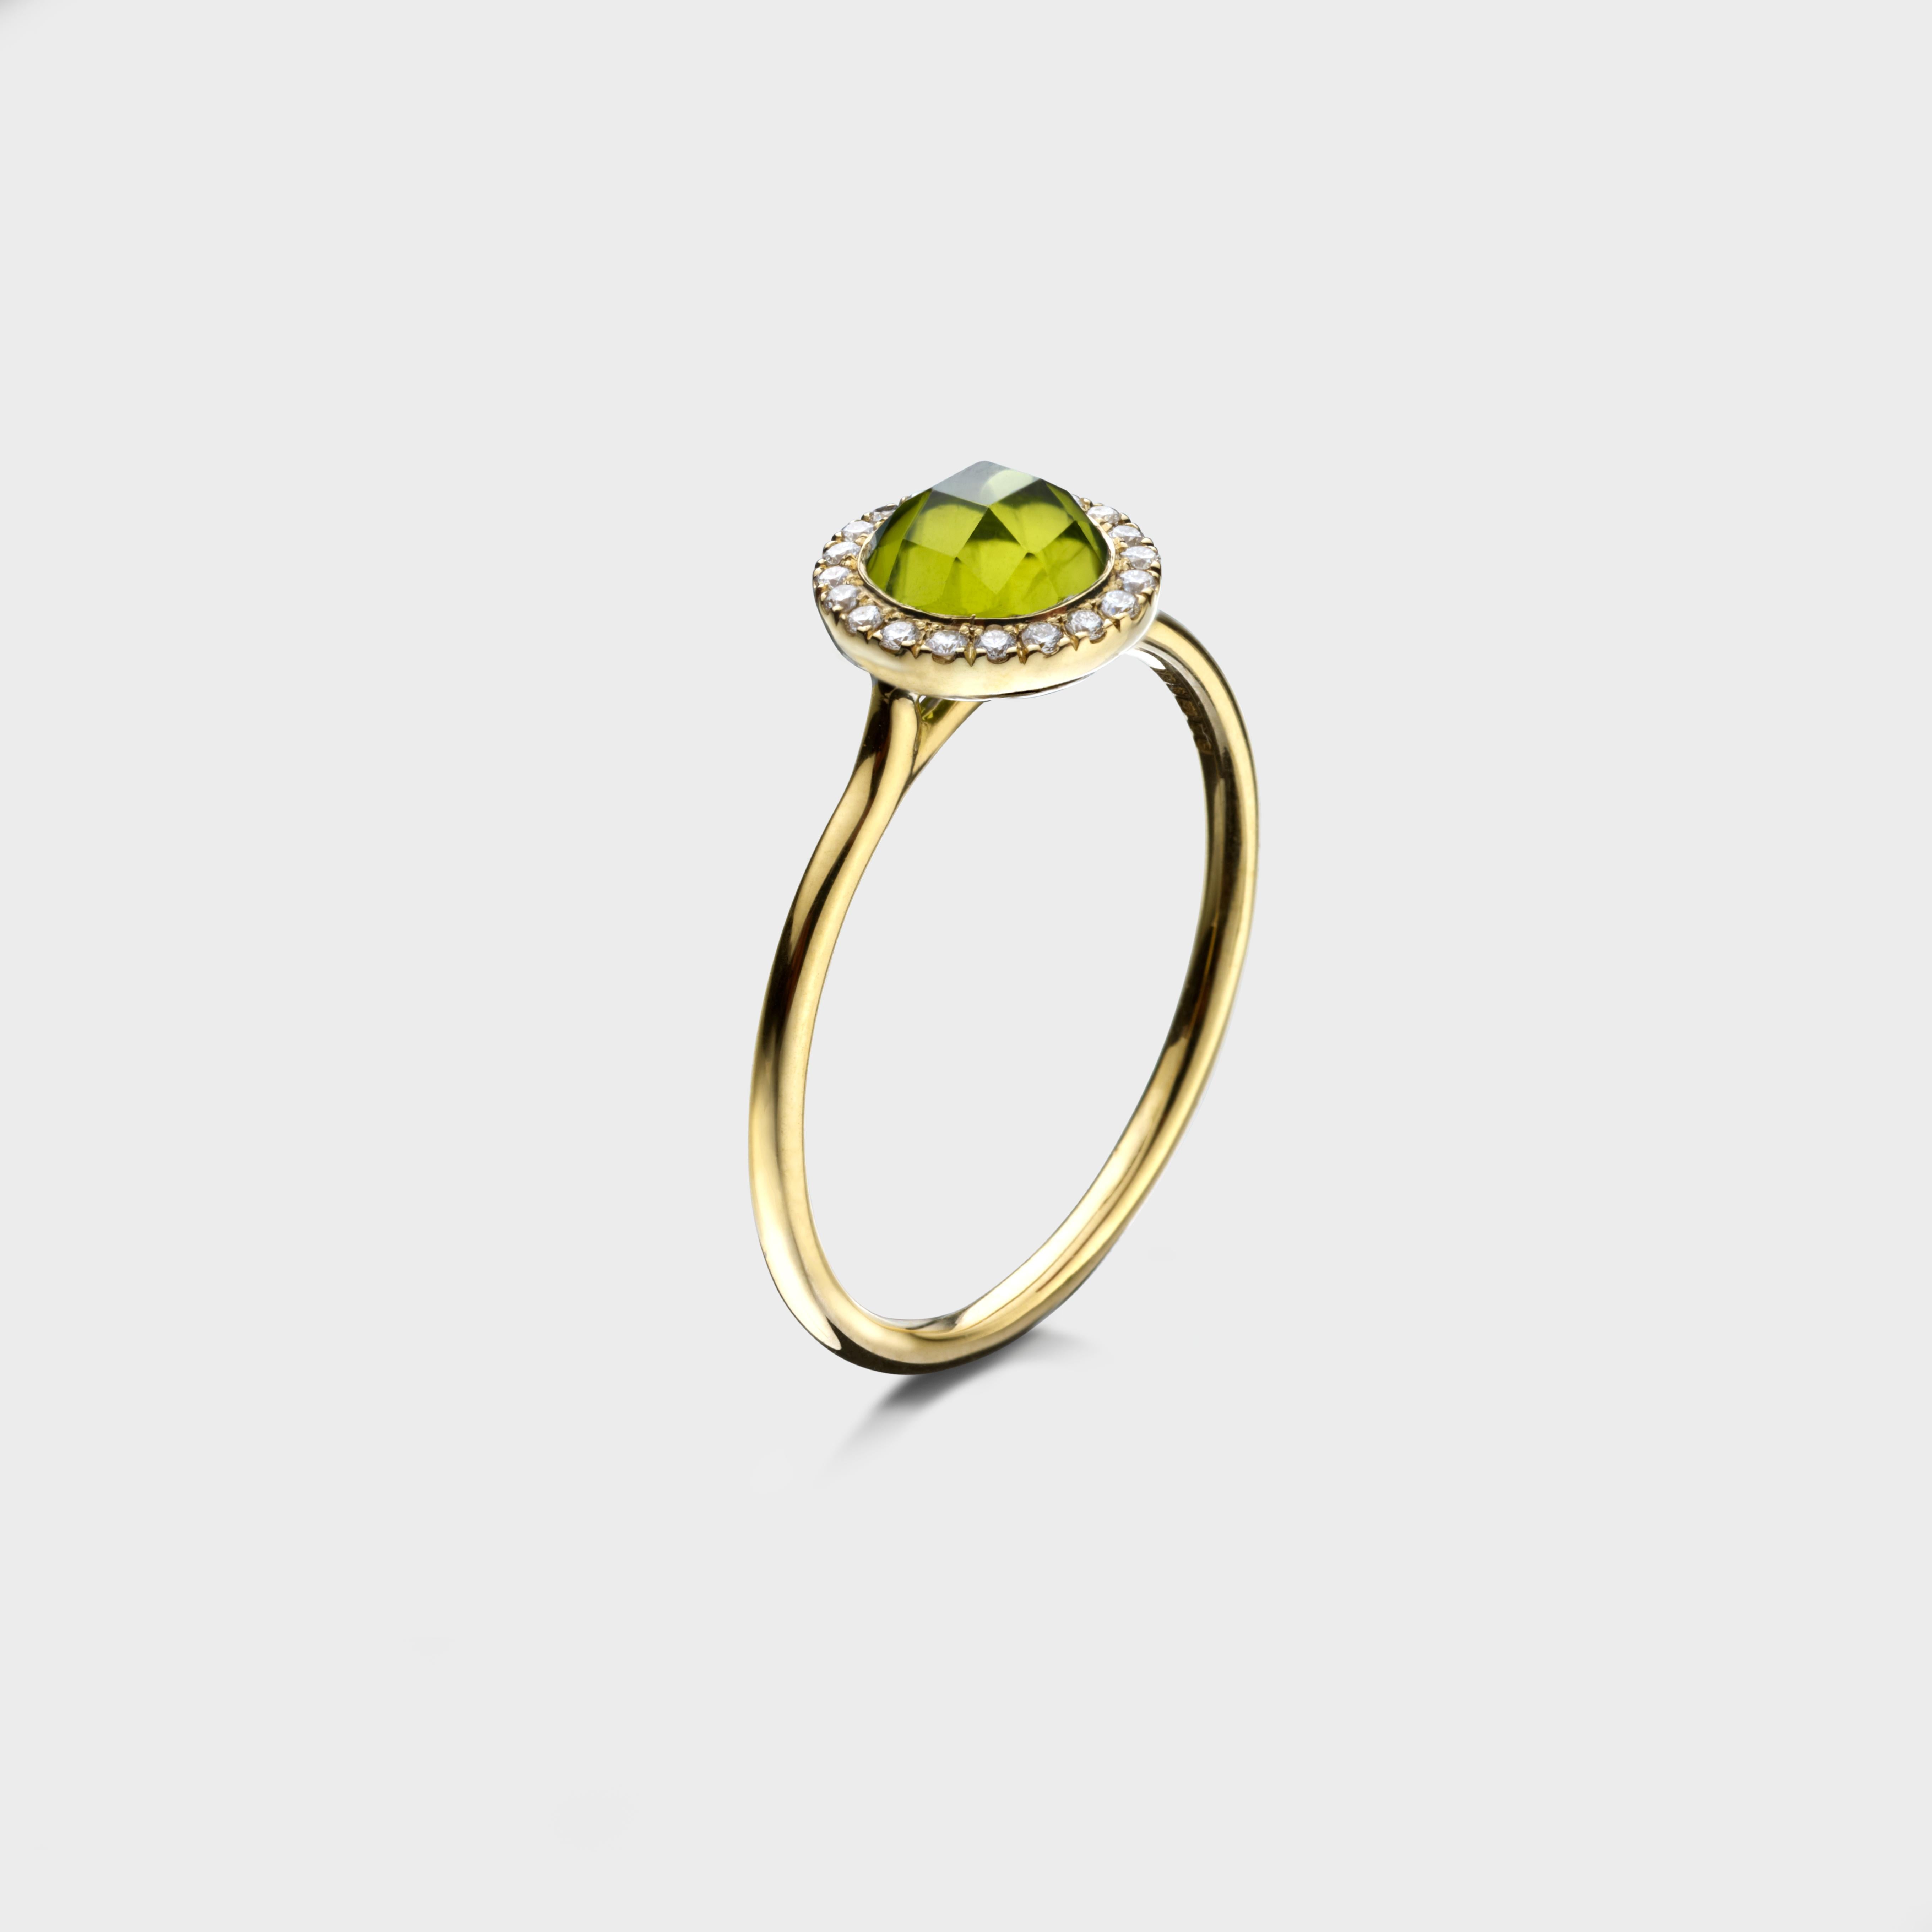 Round Cut 2.16 Carat Checkerboard Peridot Halo Ring in 18 Karat Yellow Gold For Sale